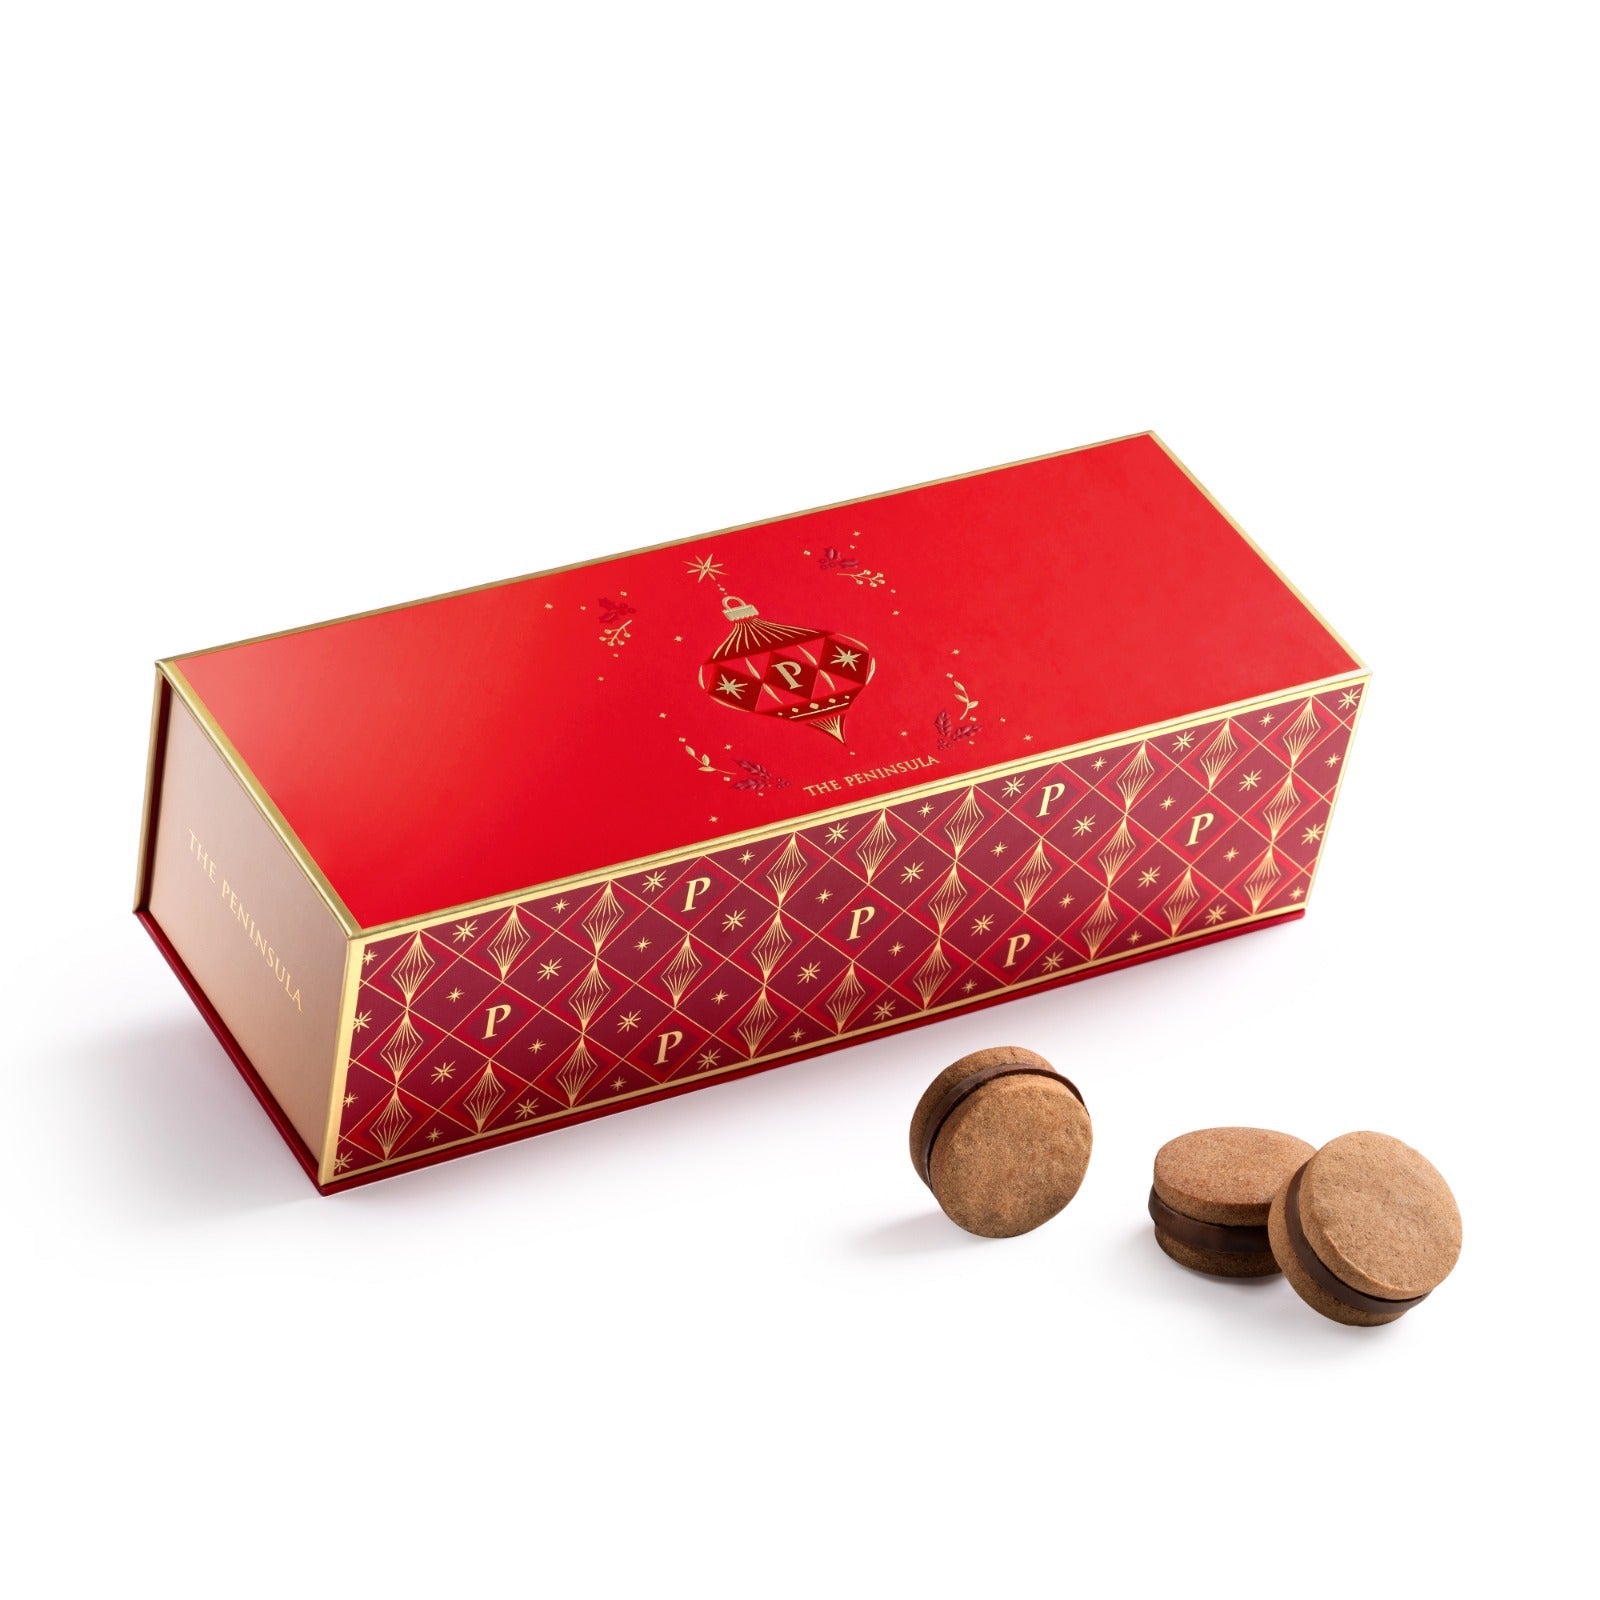 [JLL Offer] The Peninsula Boutique | Chocolate Sables